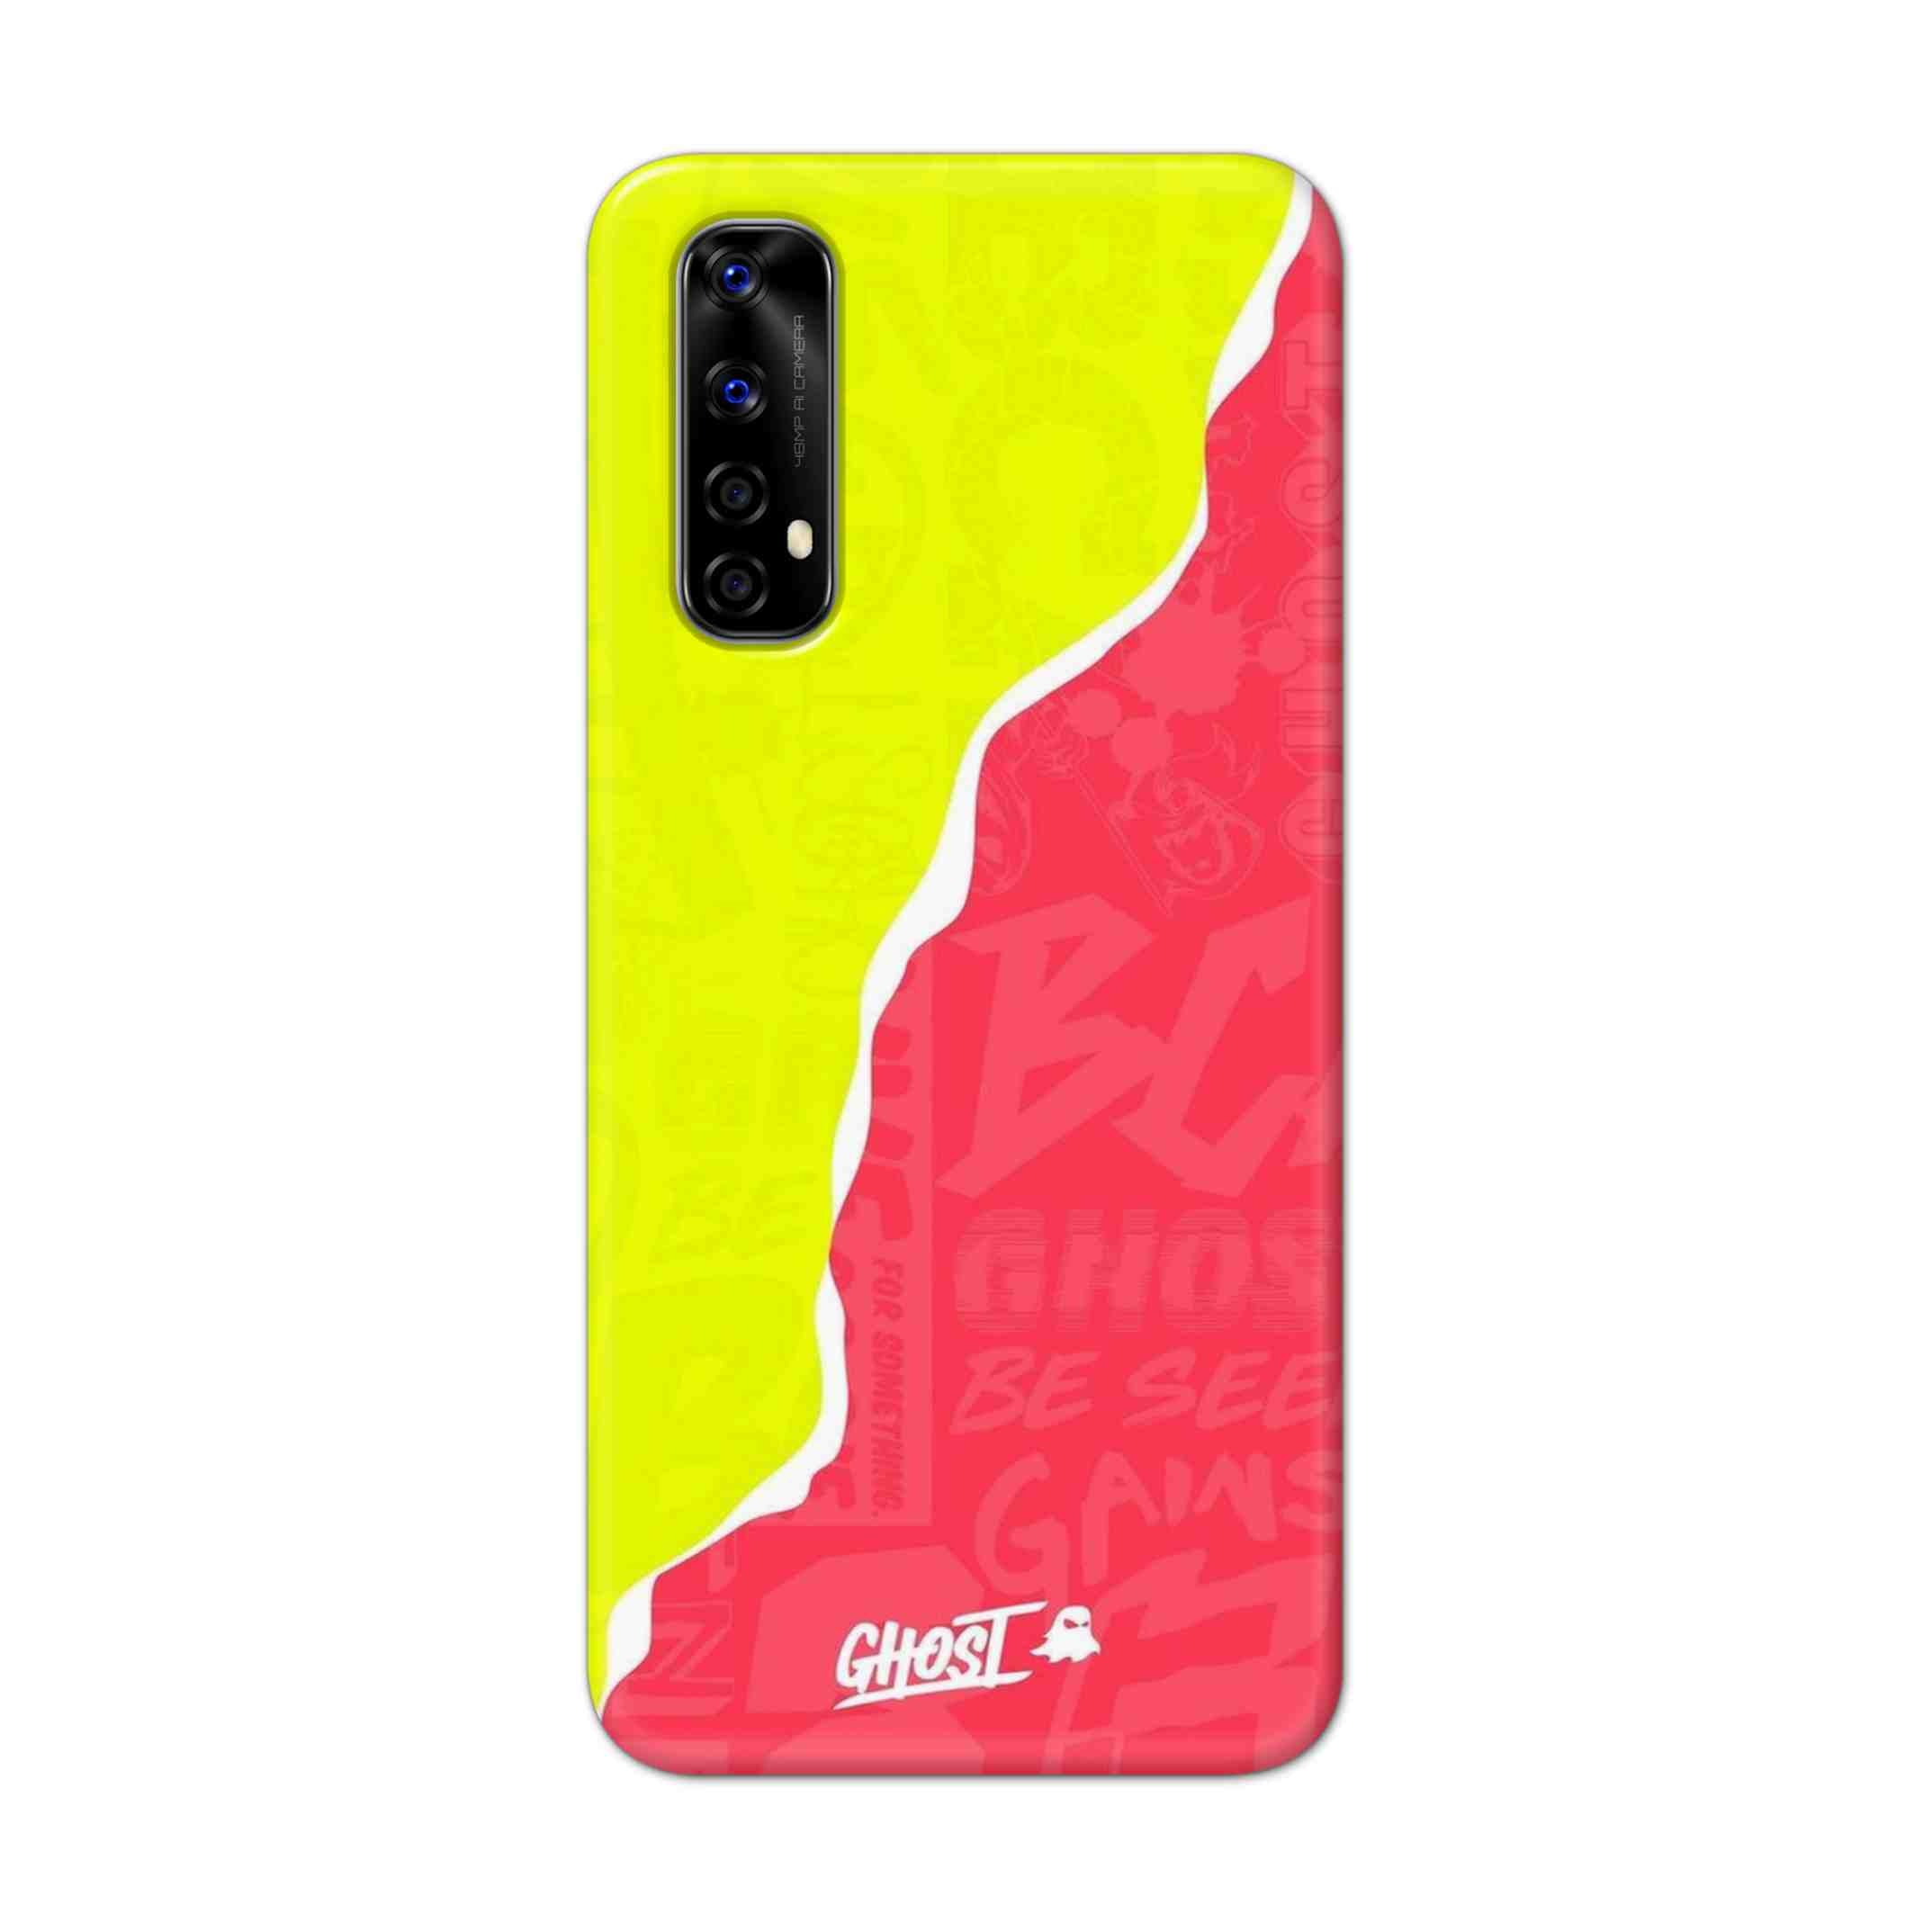 Buy Ghost Hard Back Mobile Phone Case Cover For Realme Narzo 20 Pro Online